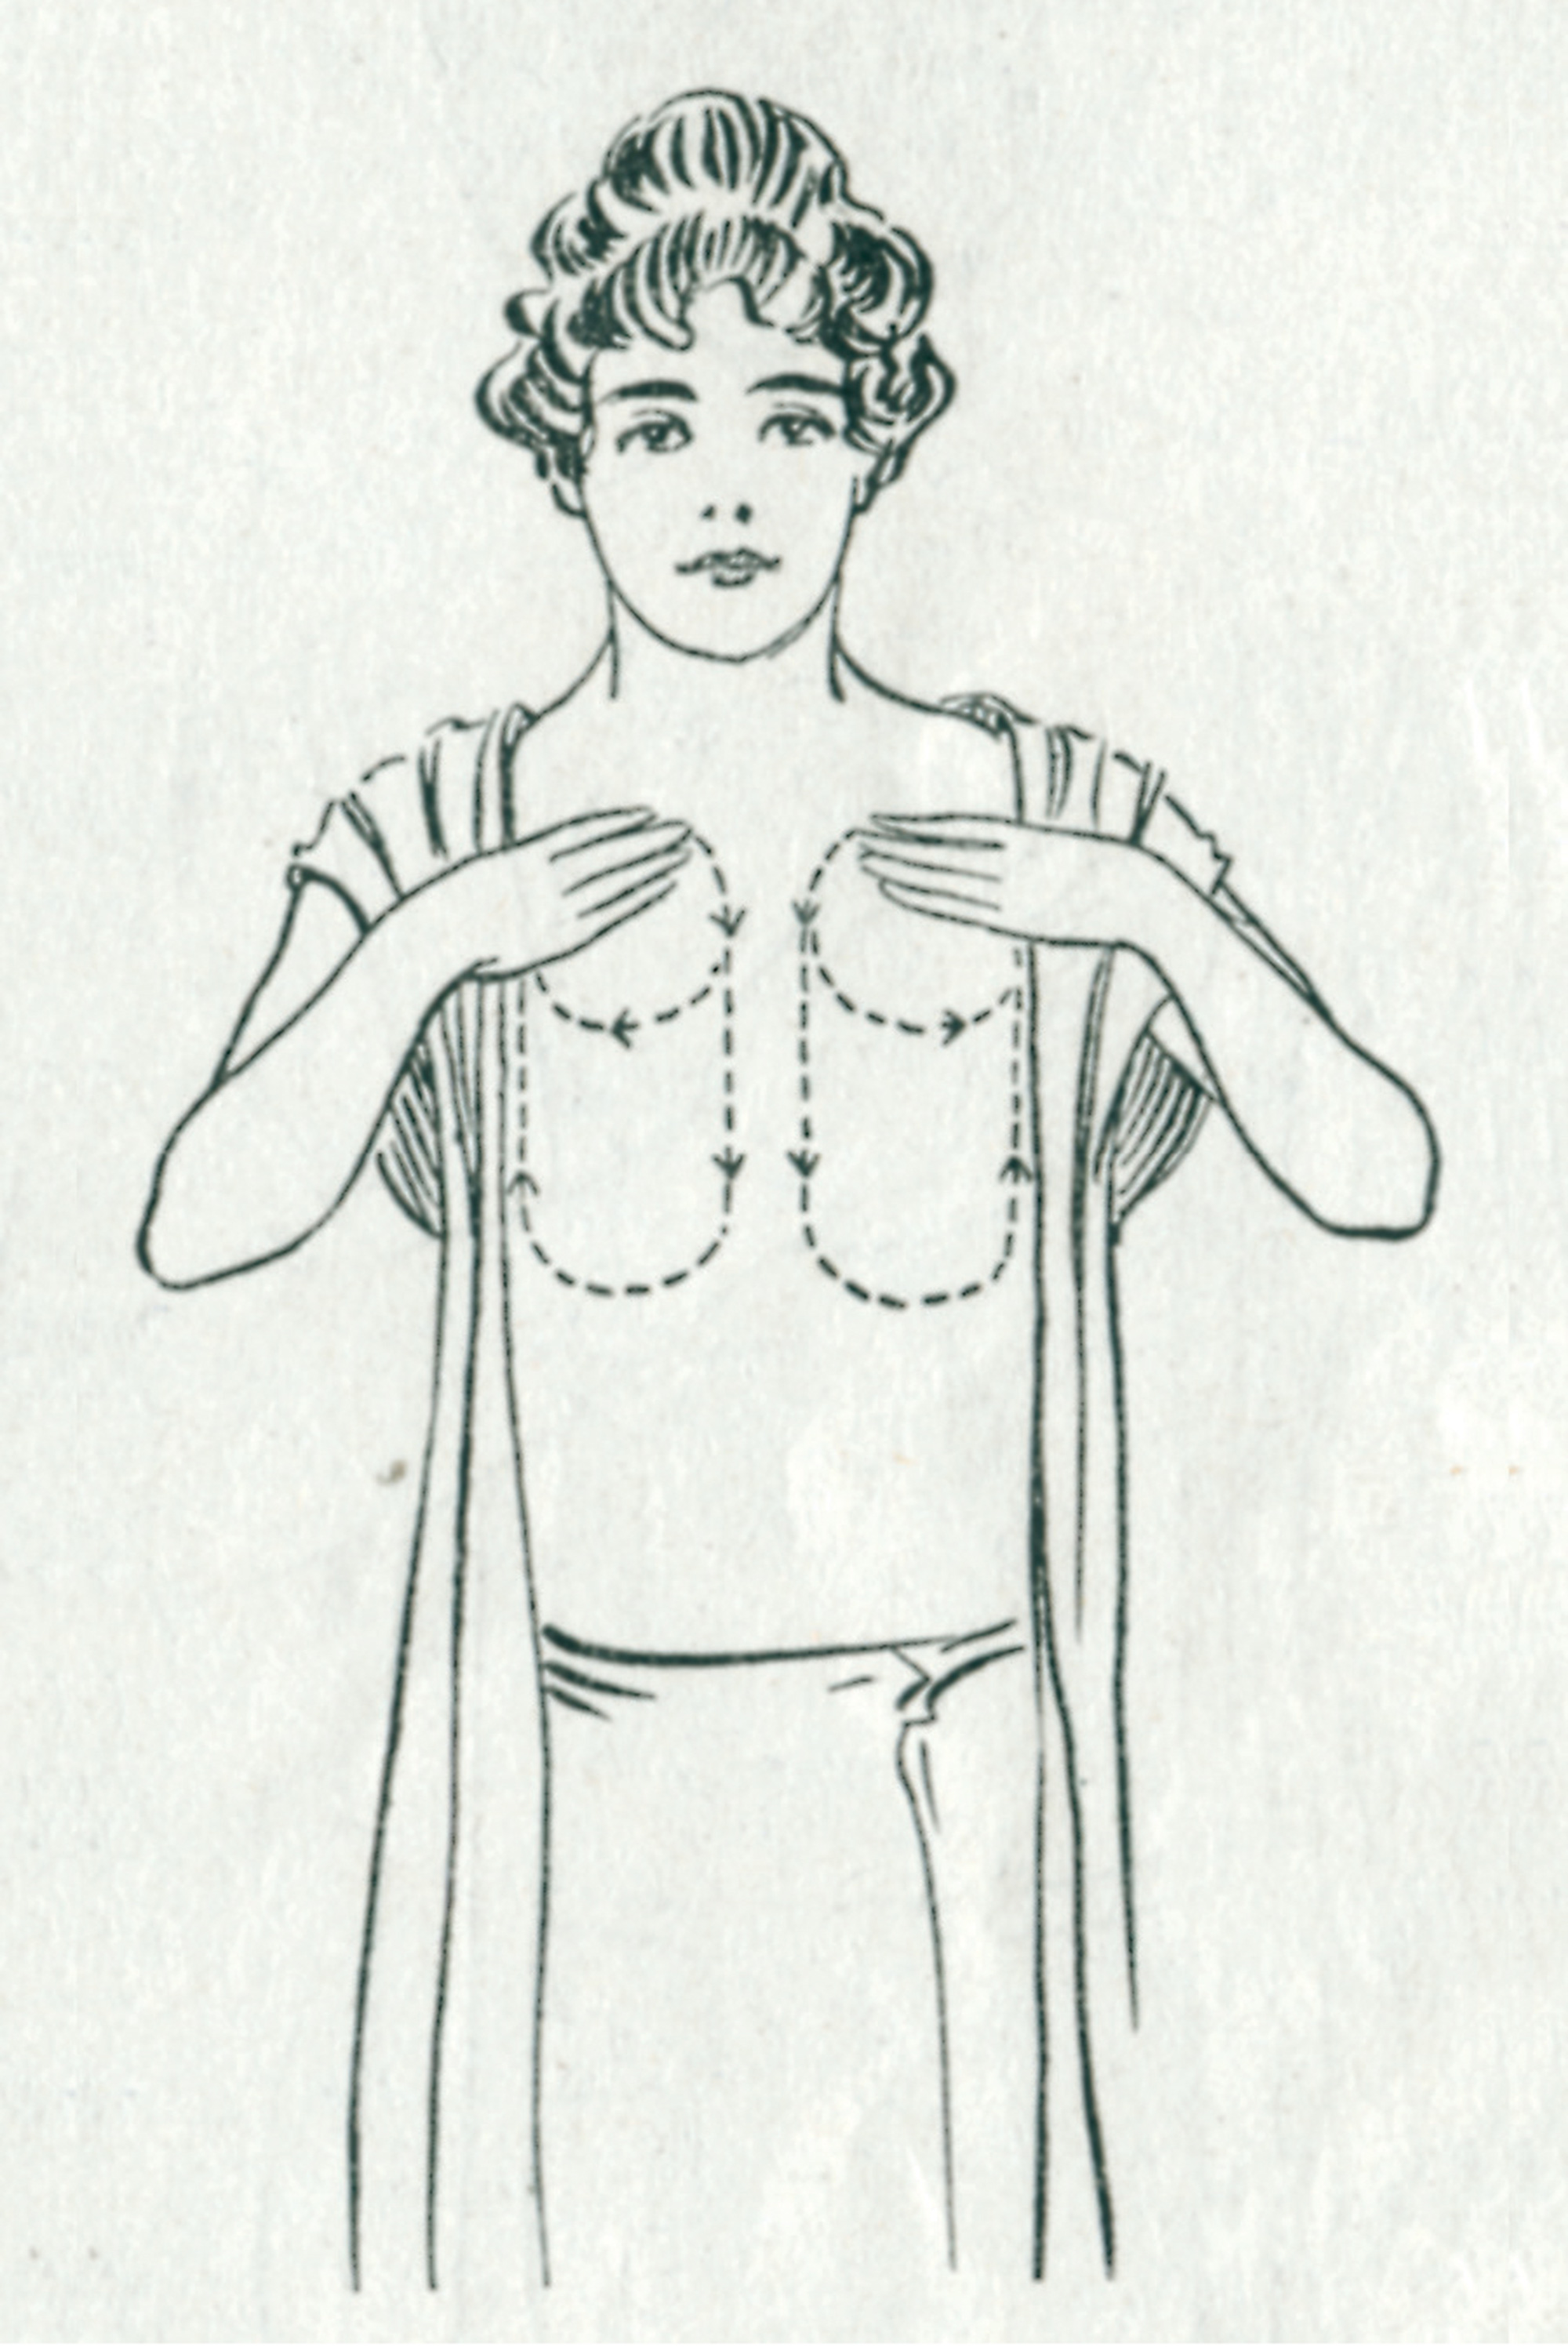 A diagram depicting a method of chest massage from How to Use Viavi.